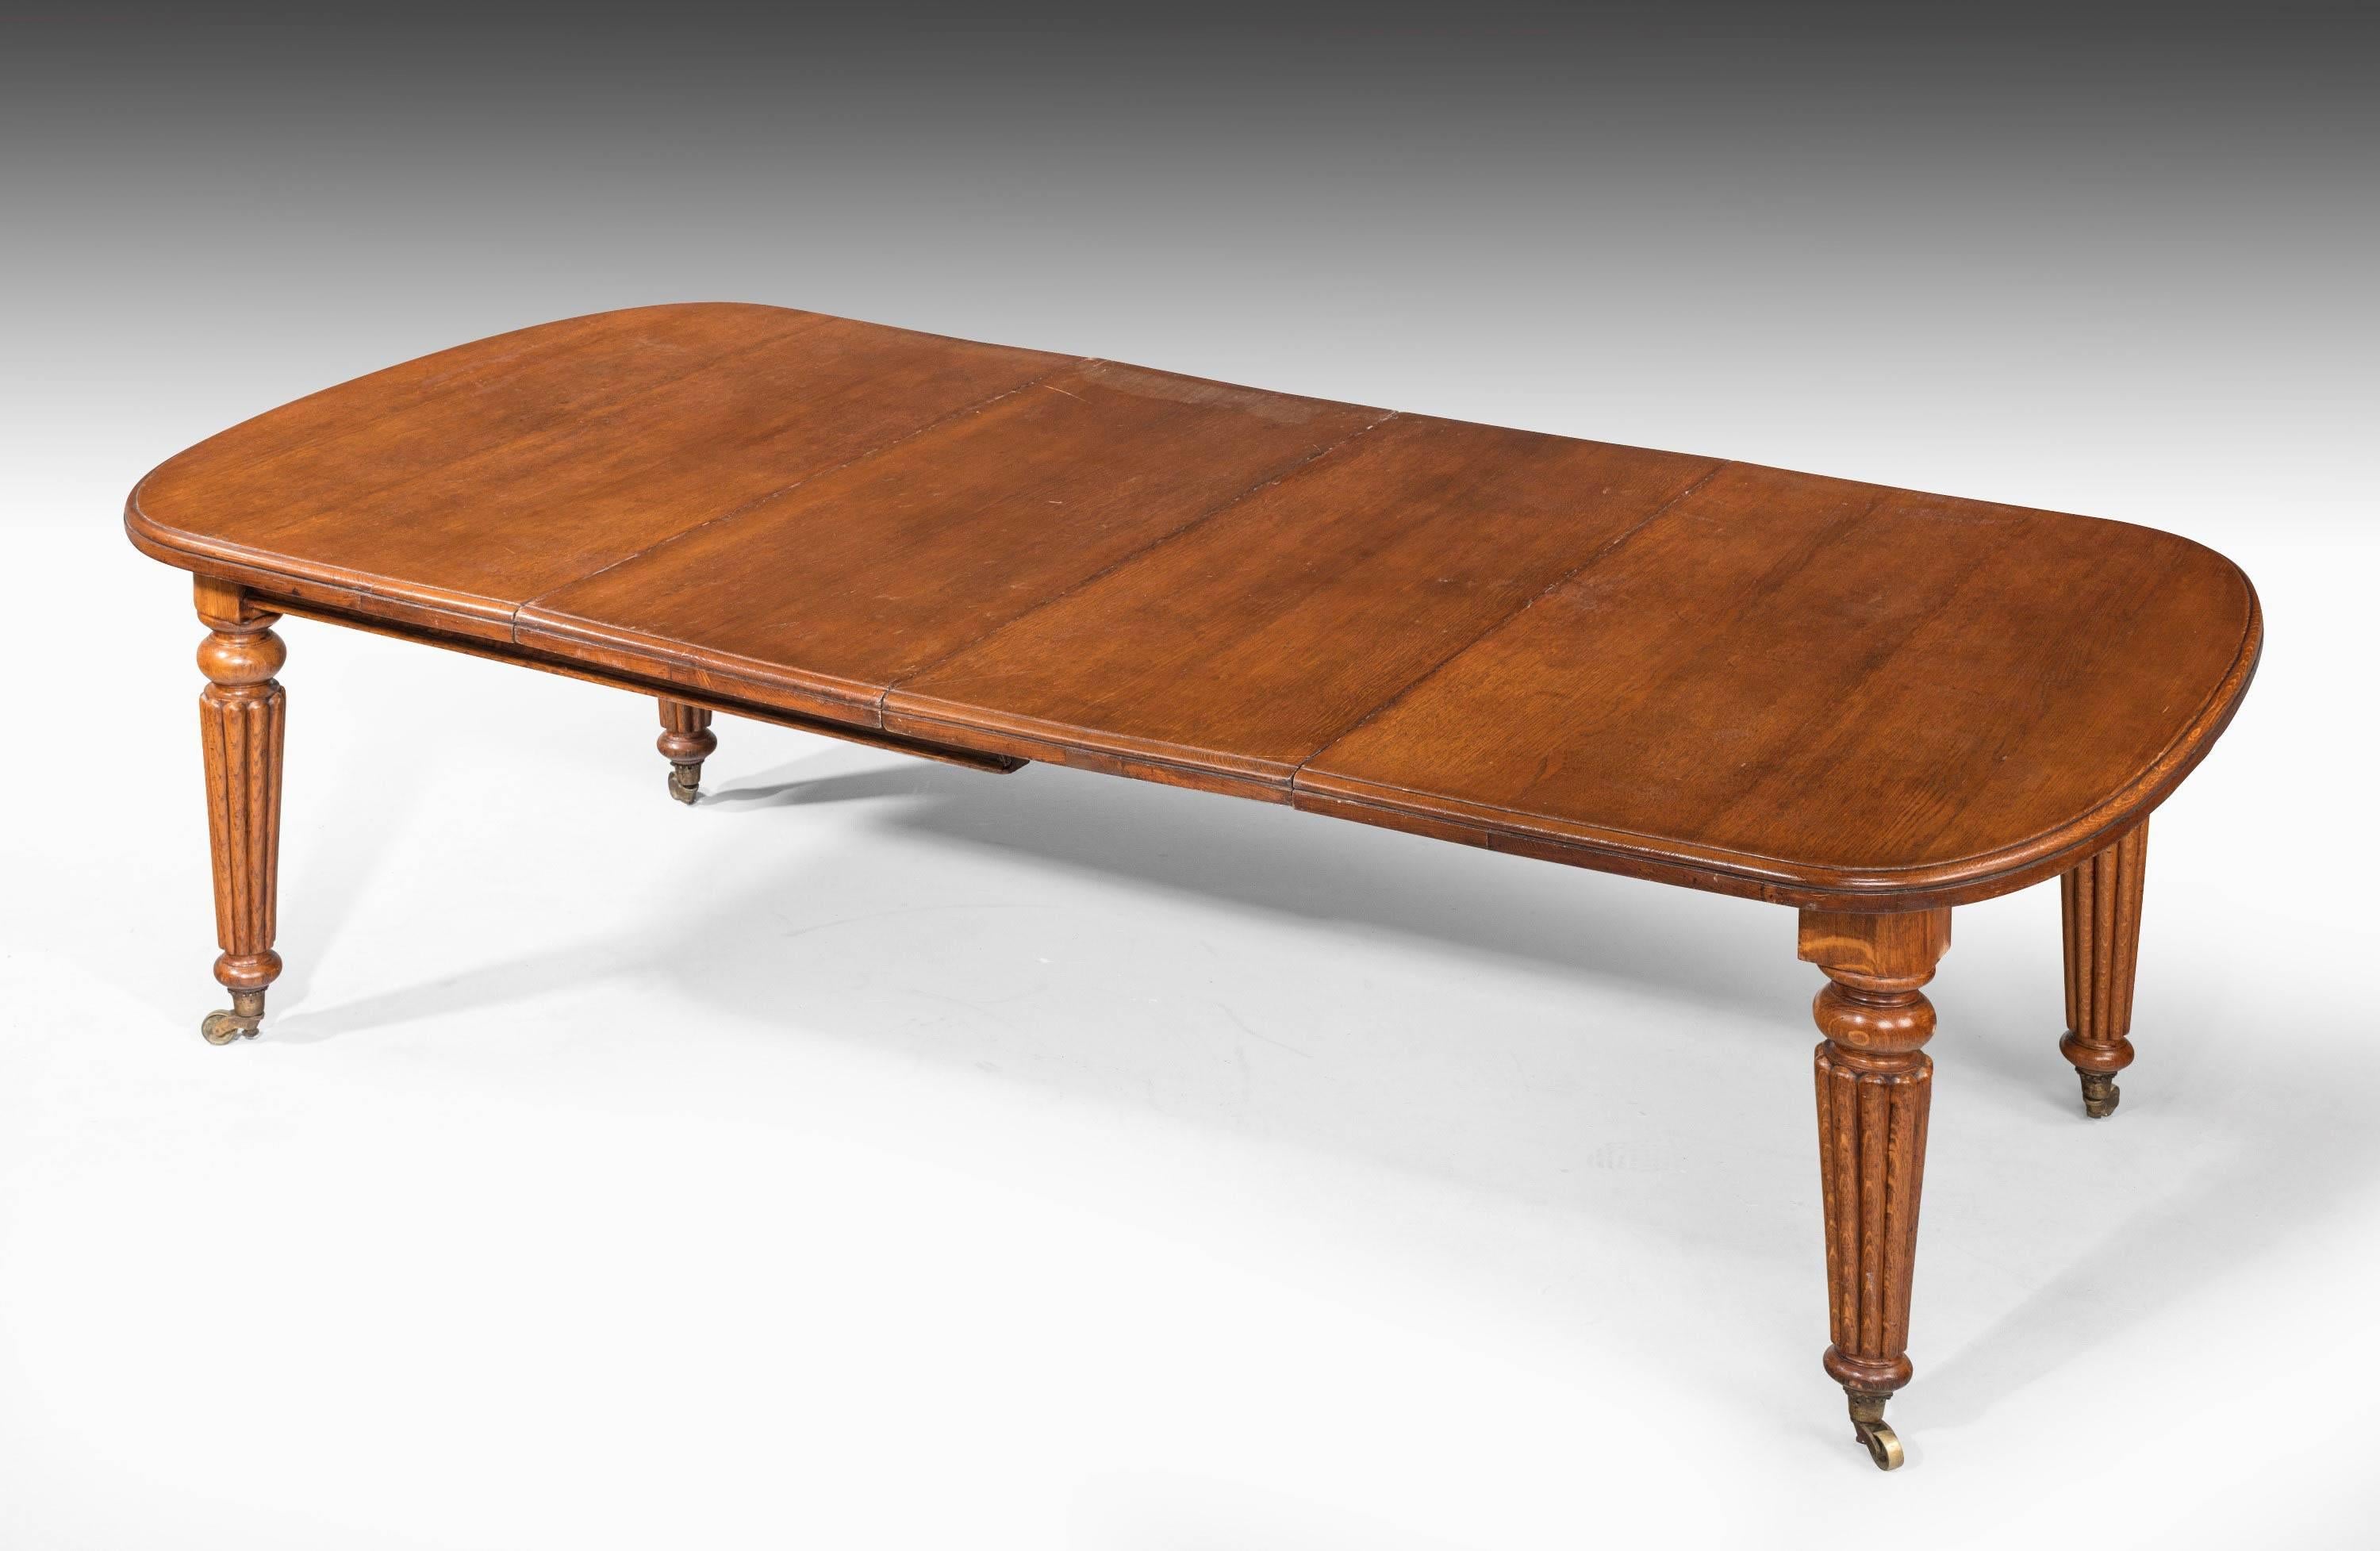 Great Britain (UK) Late Regency Period Mahogany Extending Dining Table with Reeded Decoration